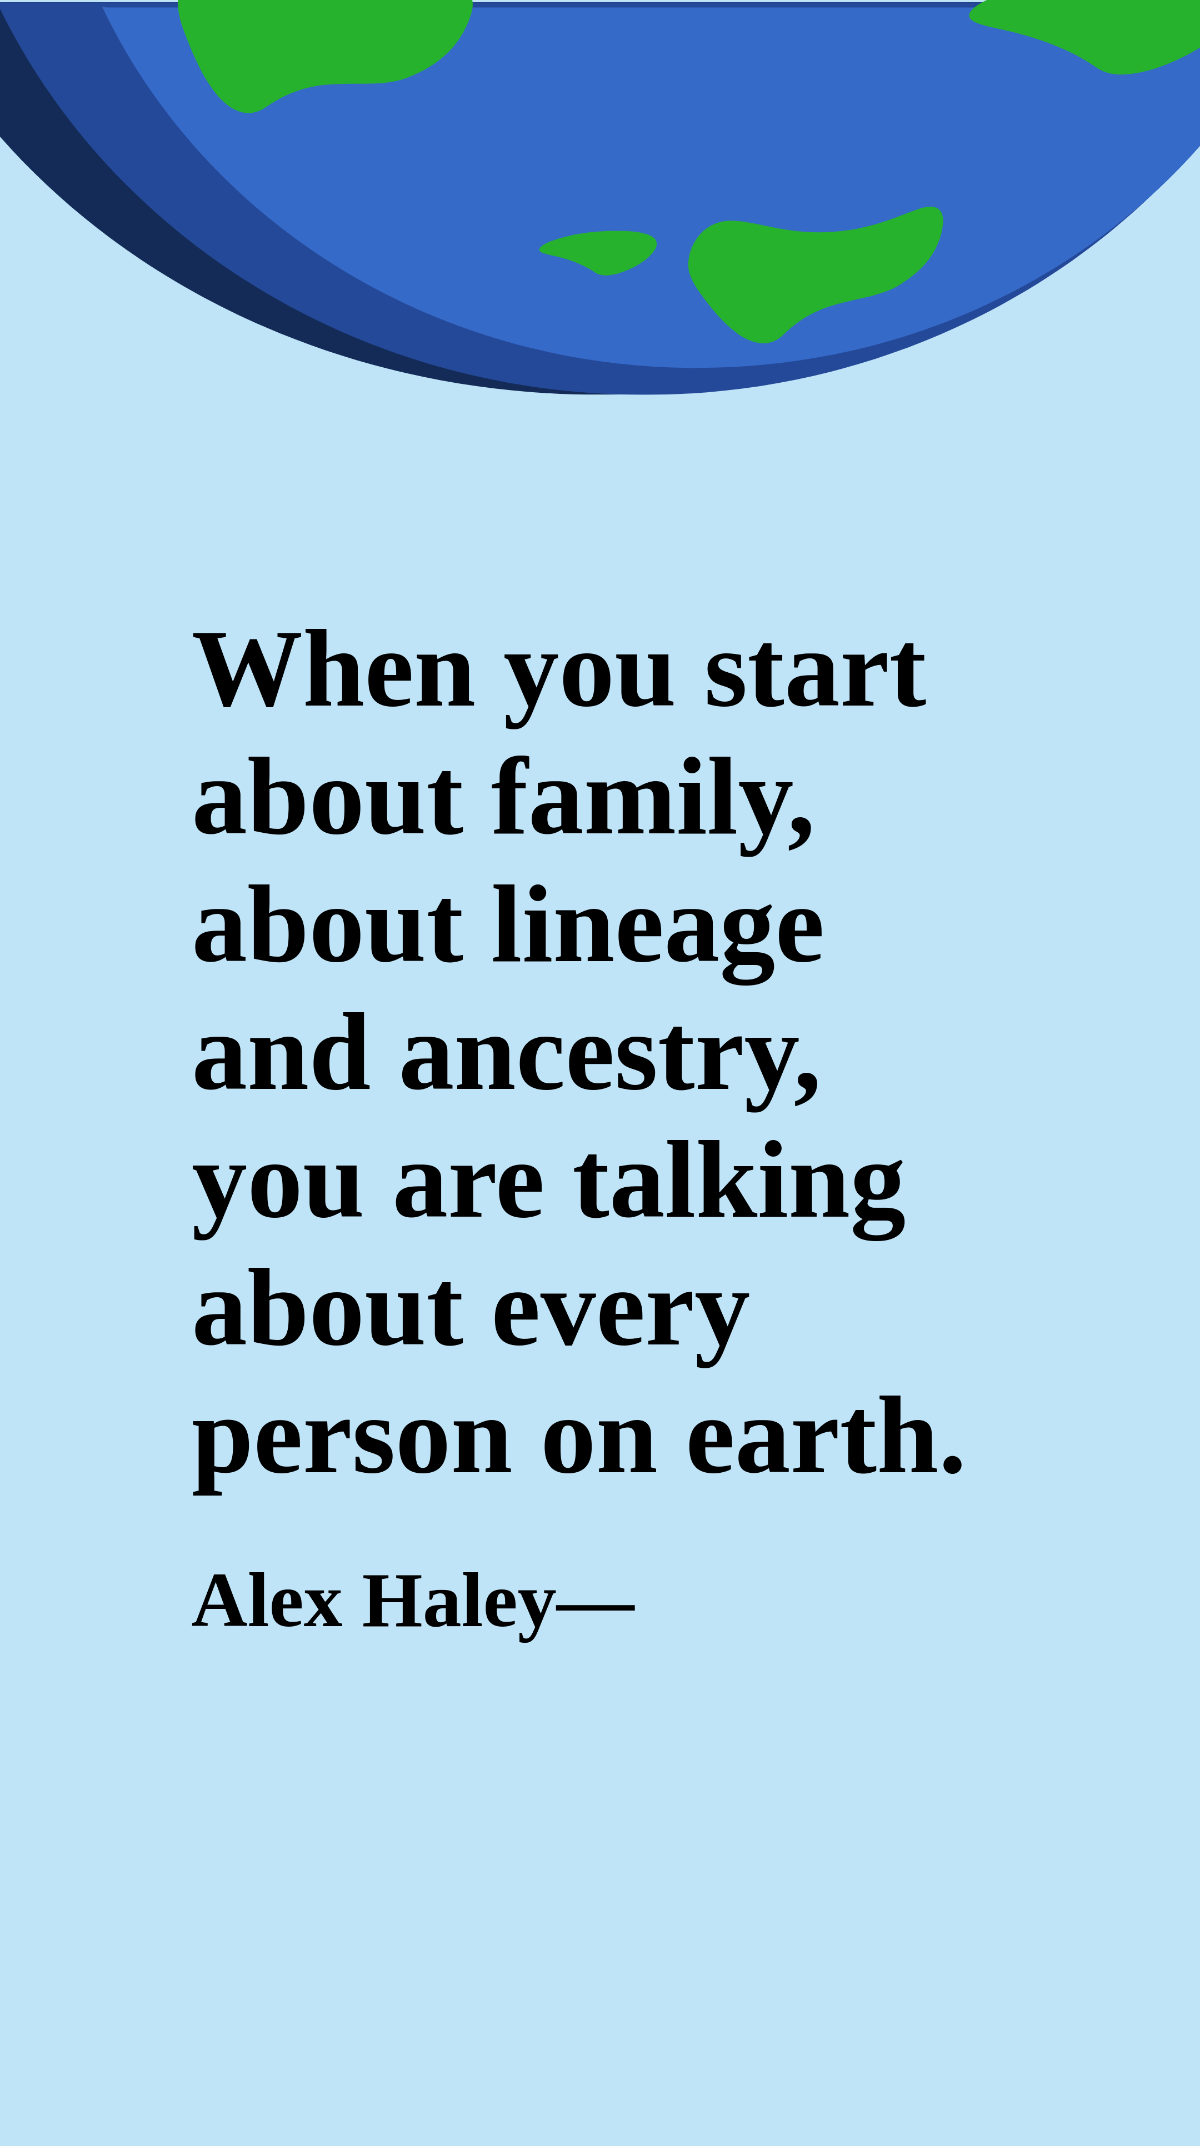 Alex Haley - When you start about family, about lineage and ancestry, you are talking about every person on earth. Template